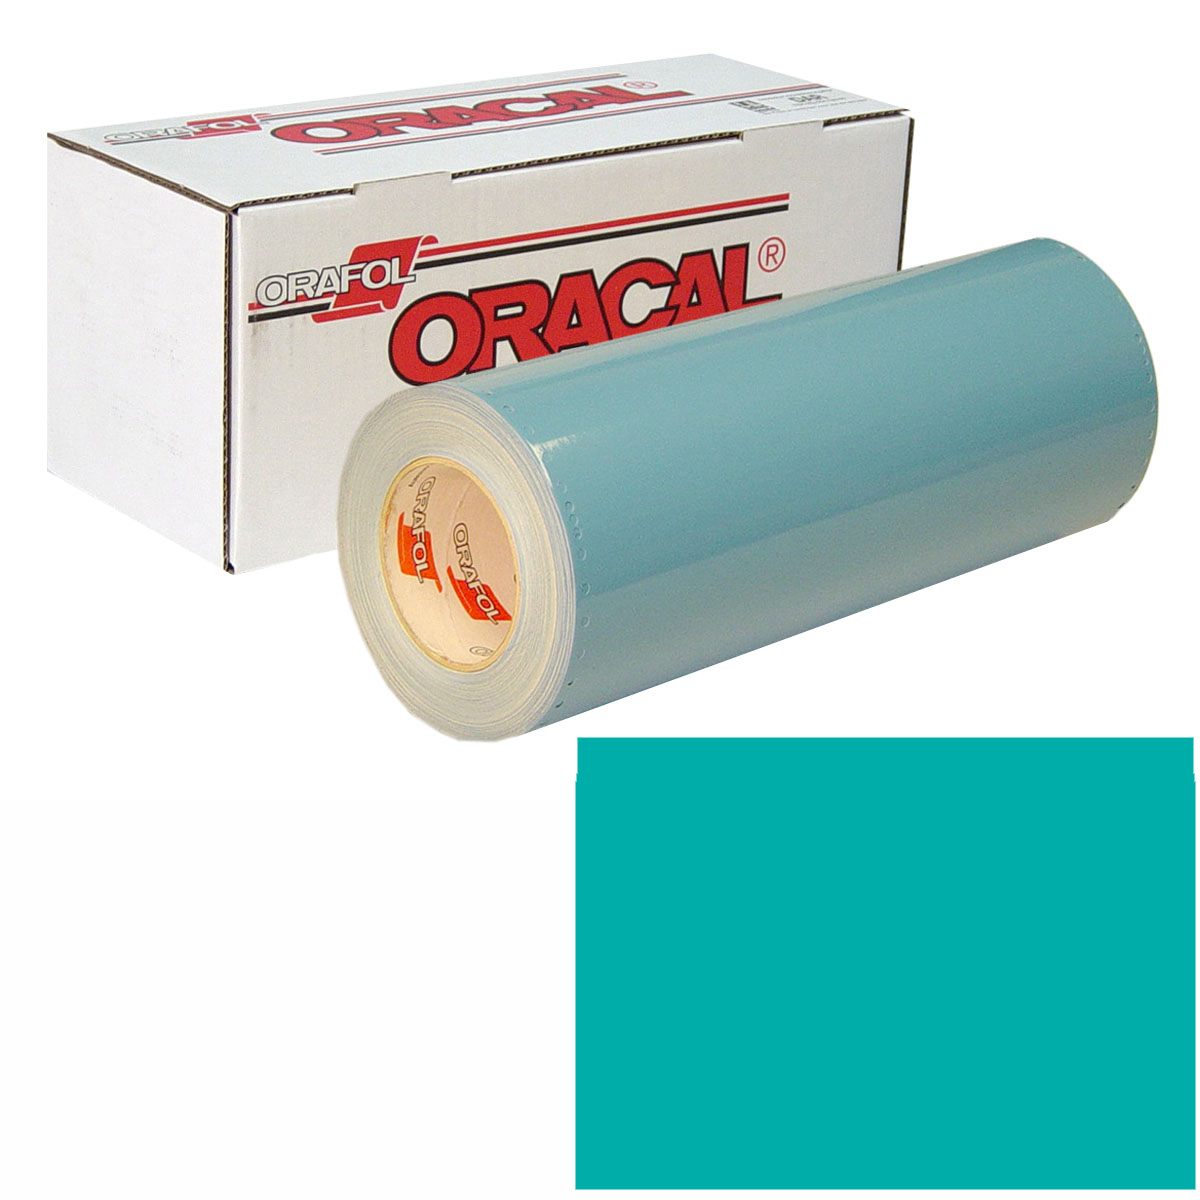 ORACAL 751 30in X 10yd 054 Turquoise